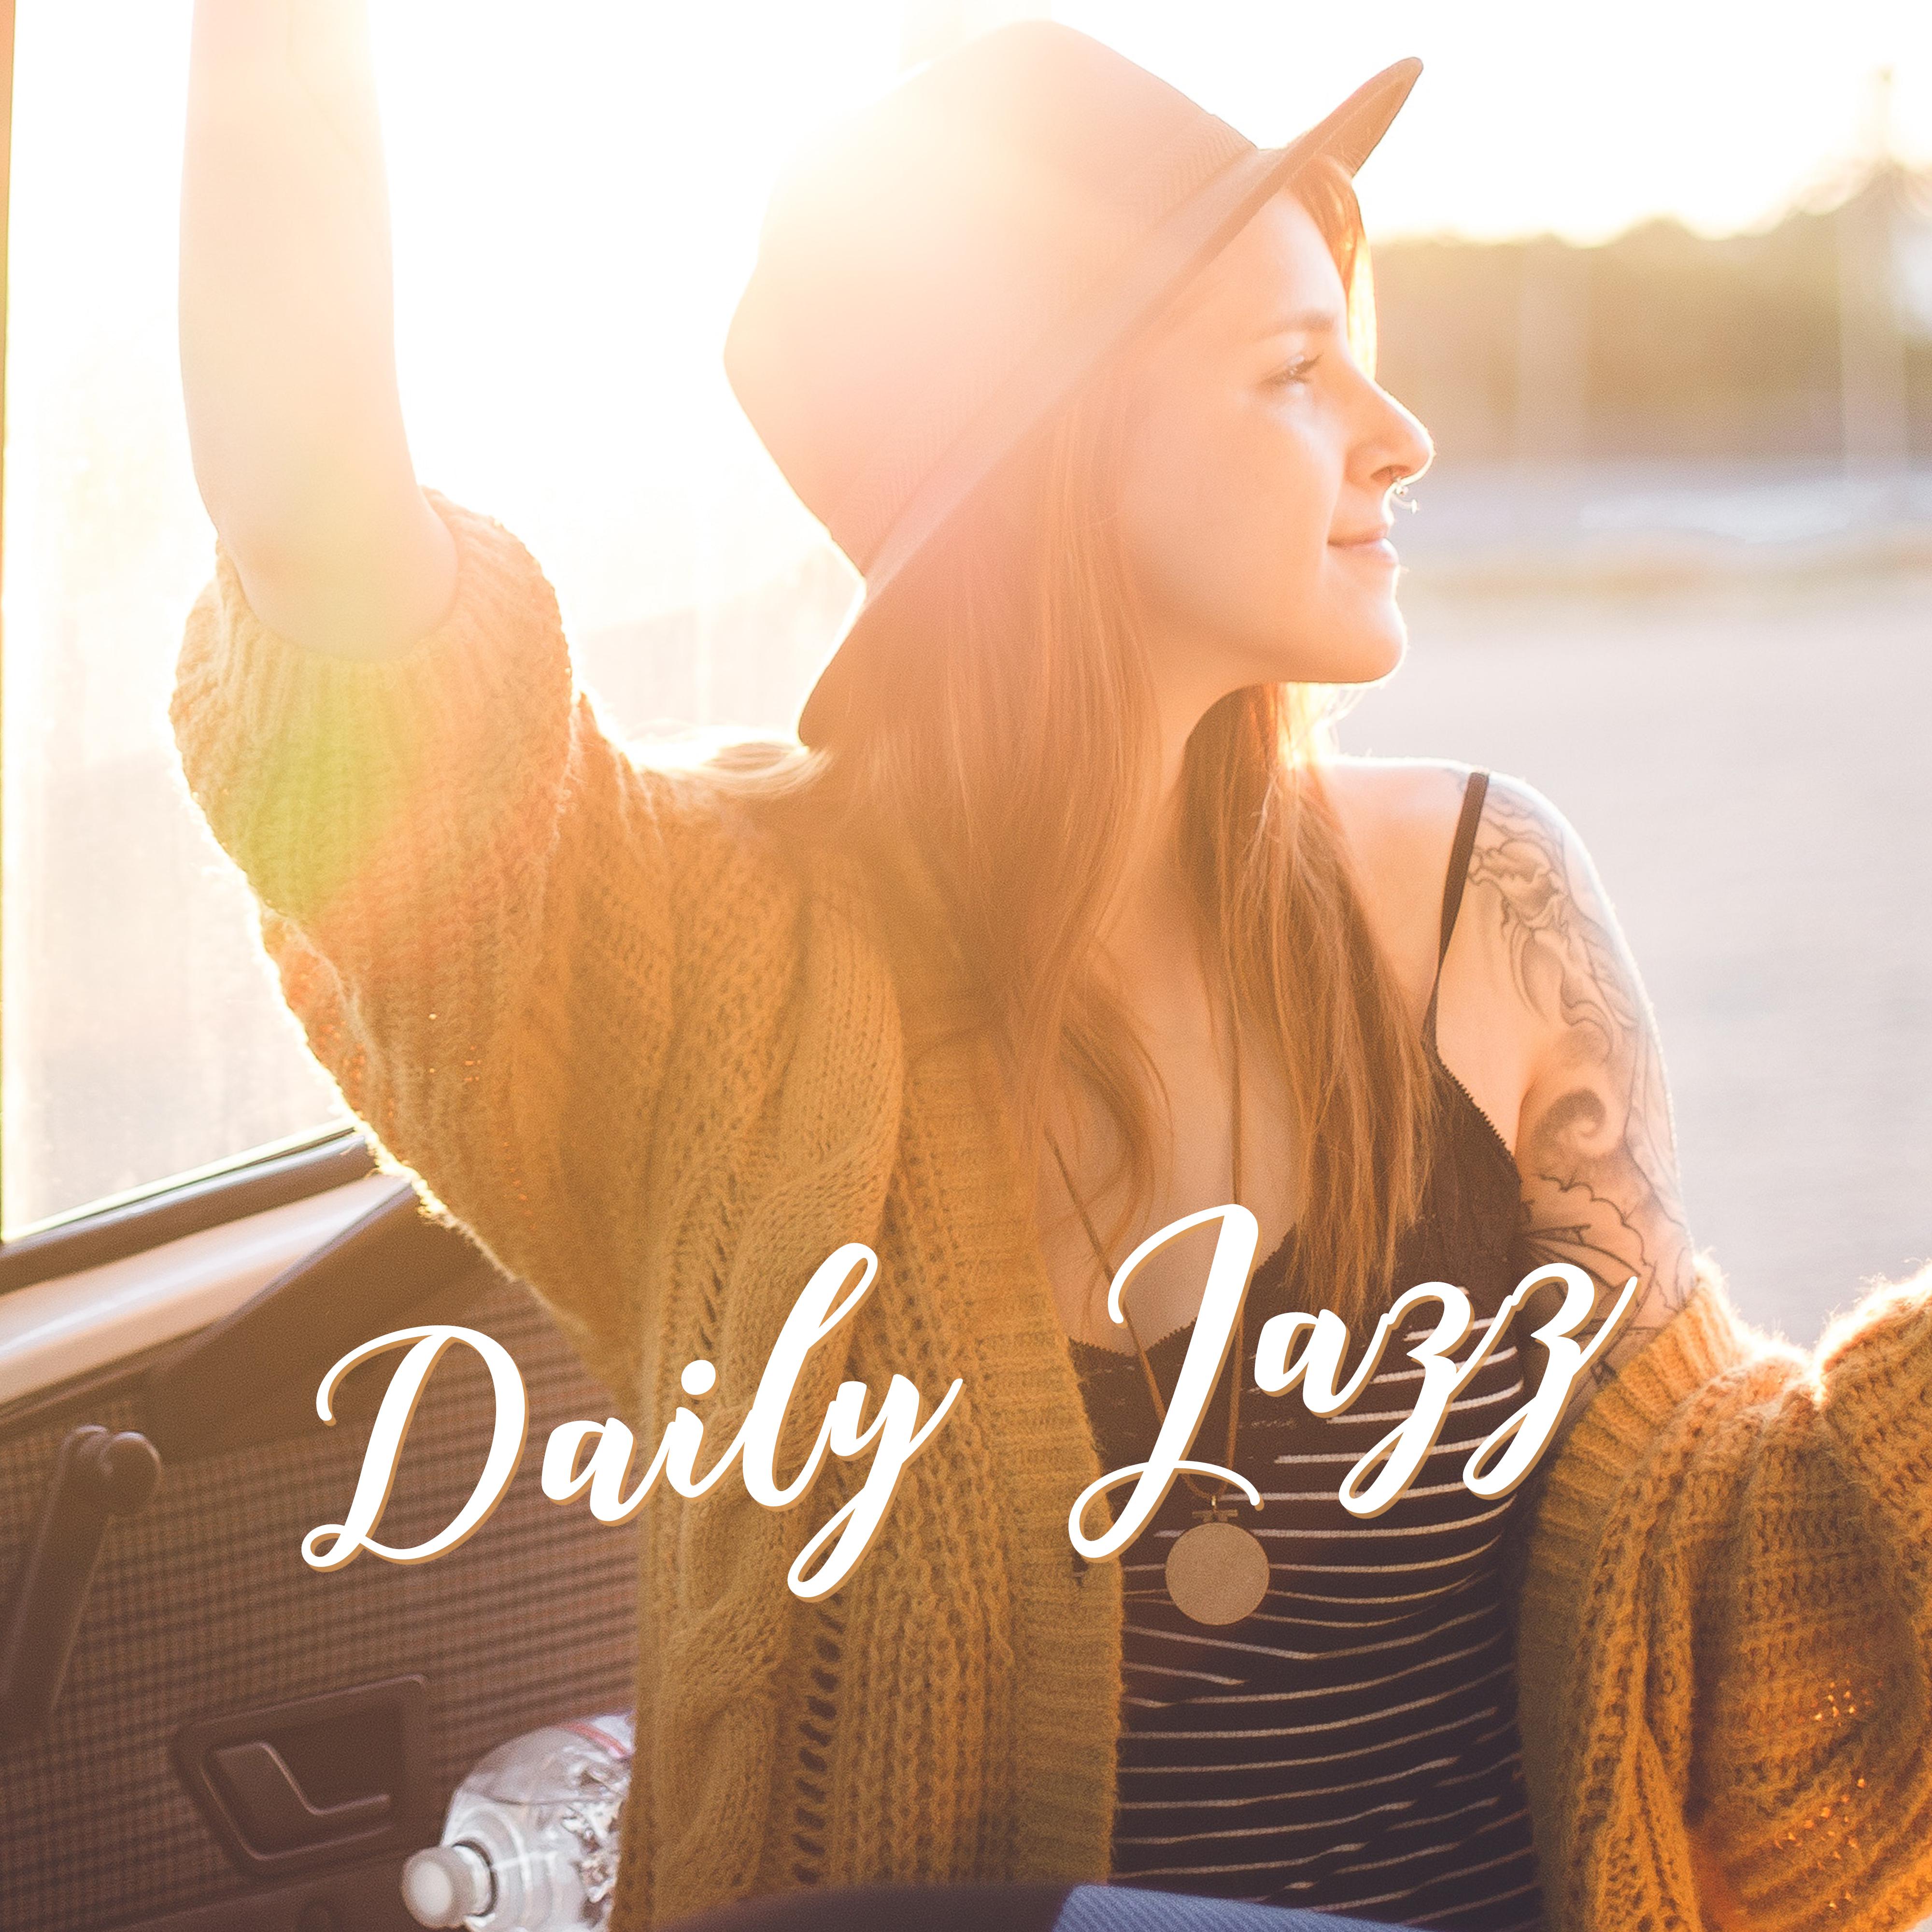 Daily Jazz: Instrumental Compositions for the Everyday Hardships of Life